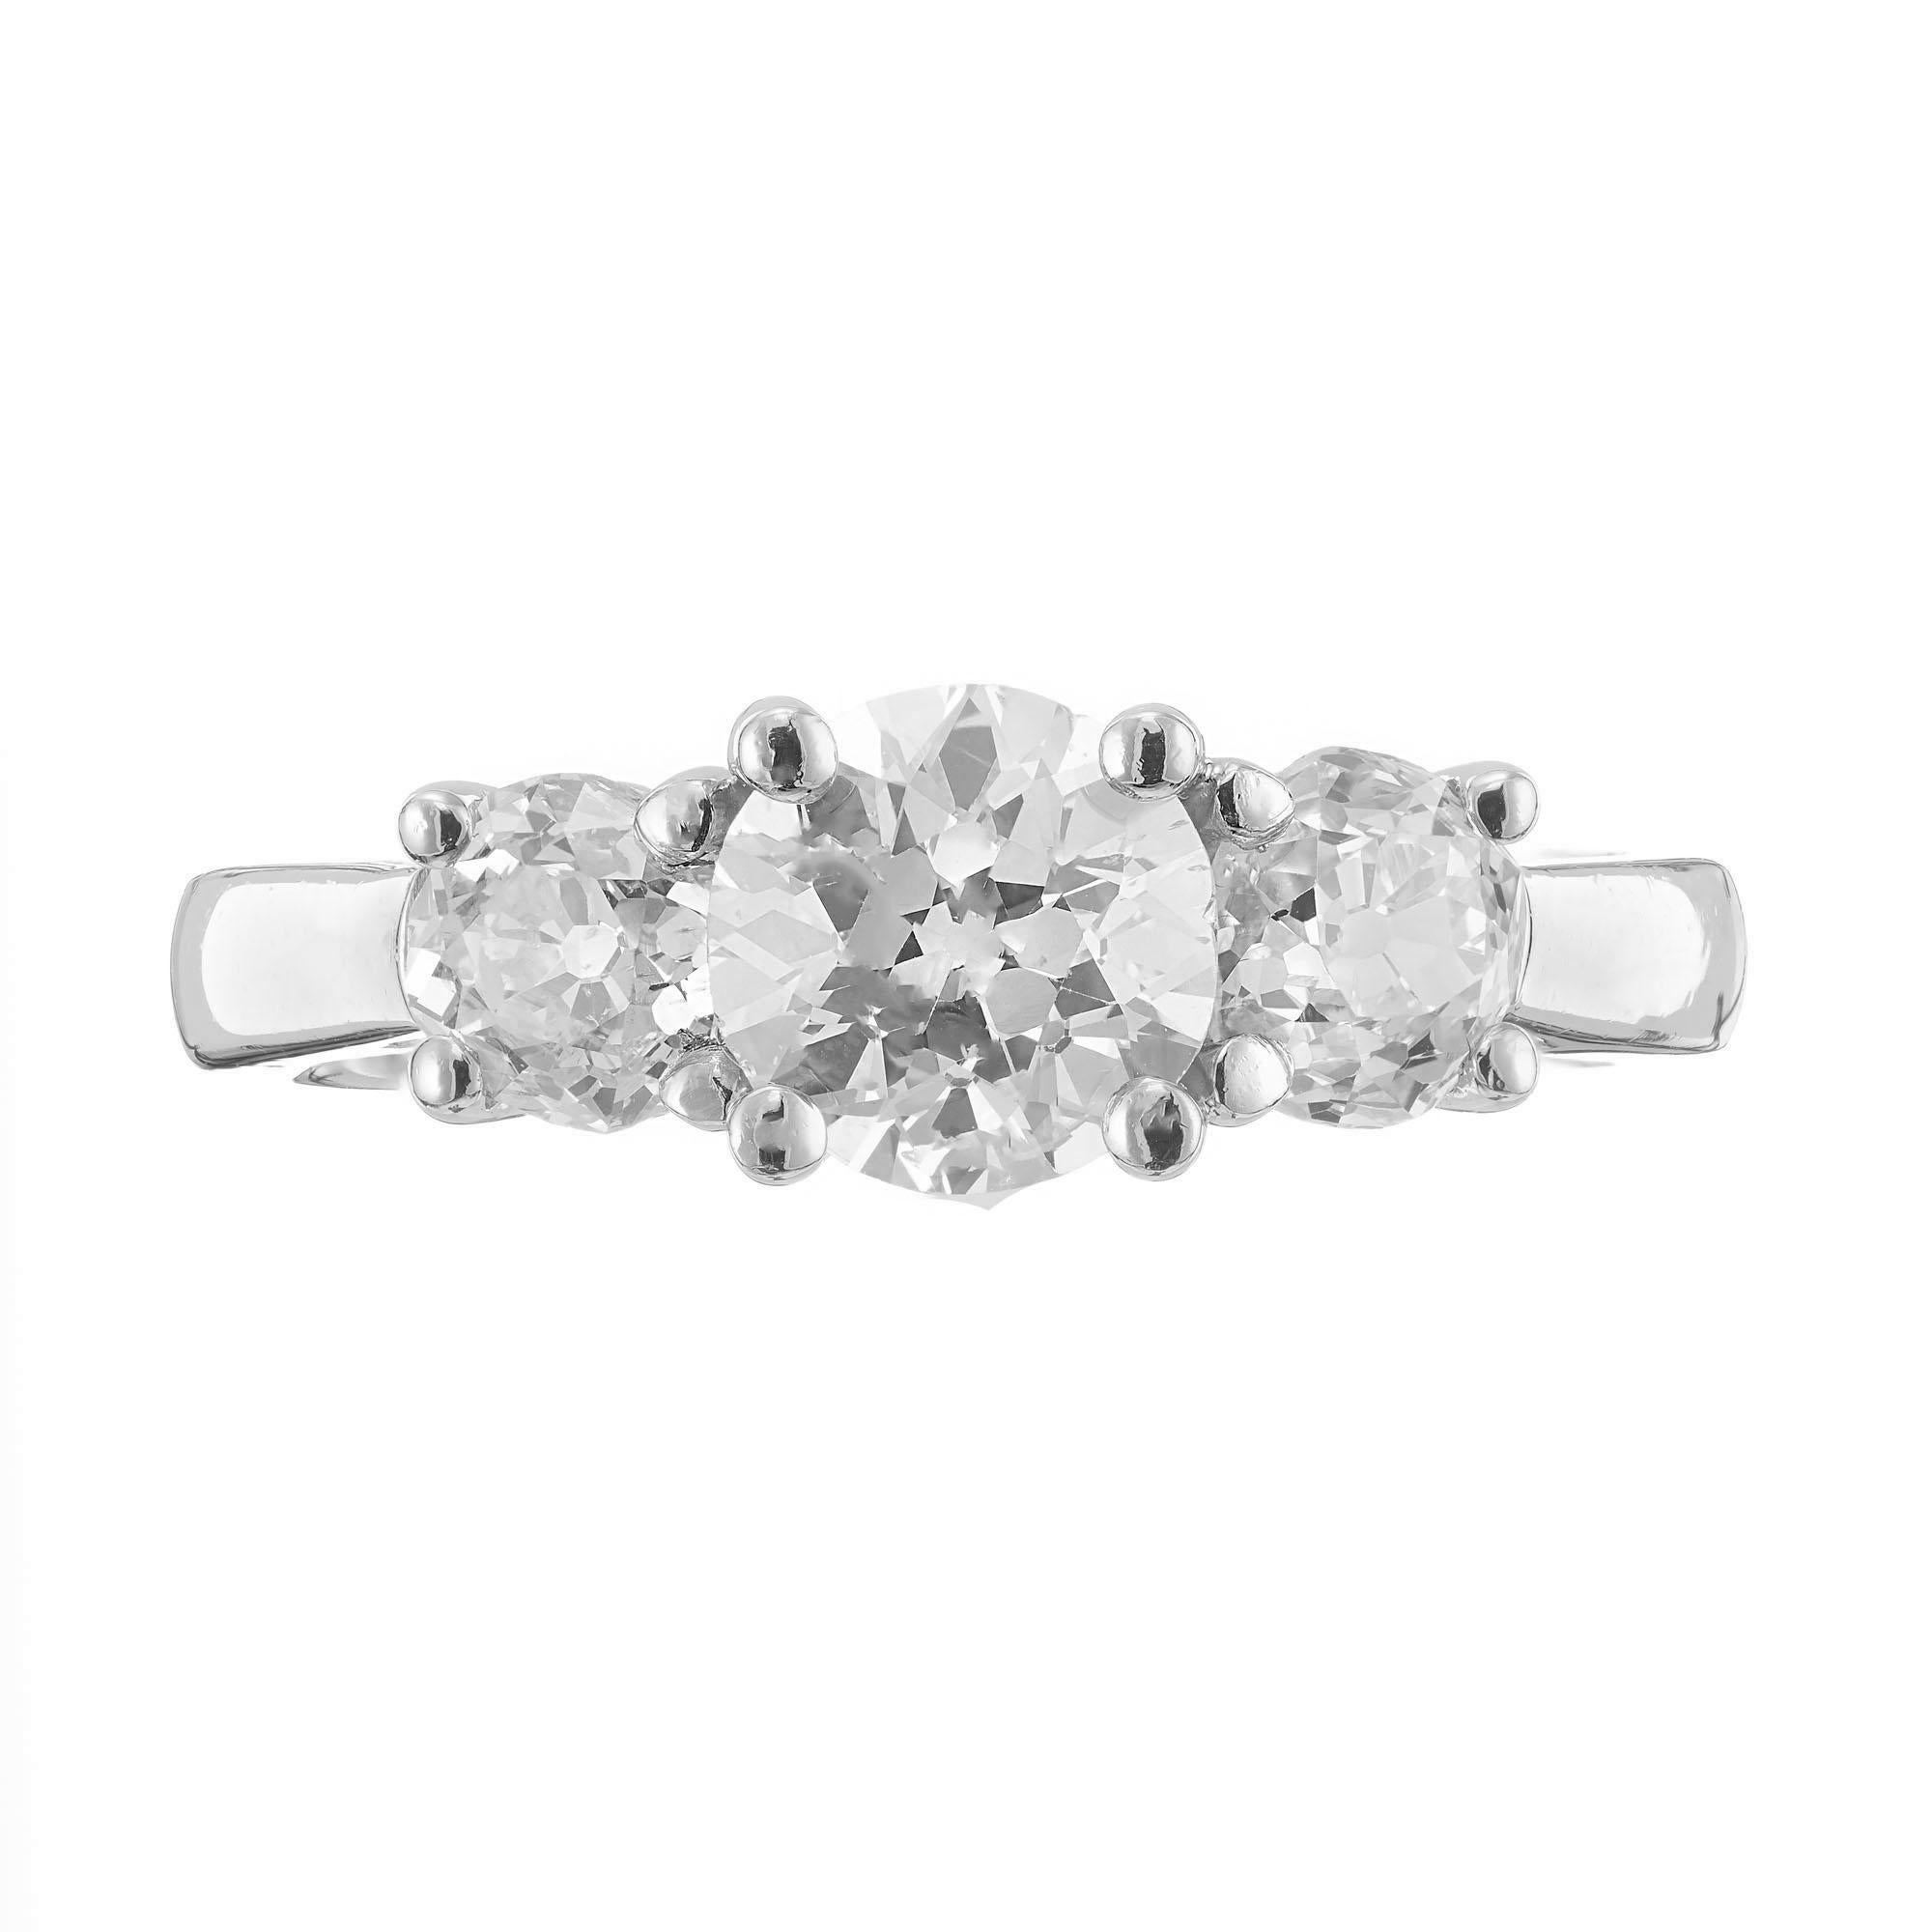 Three-stone diamond engagement ring. EGL certified Old European cut 1.01ct center stone, set in platinum with 2 Old European cut side diamonds. Created in the Peter Suchy Workshop. 

1 old European cut diamond 1.01ct, E, SI3.  EGL certificate# NA